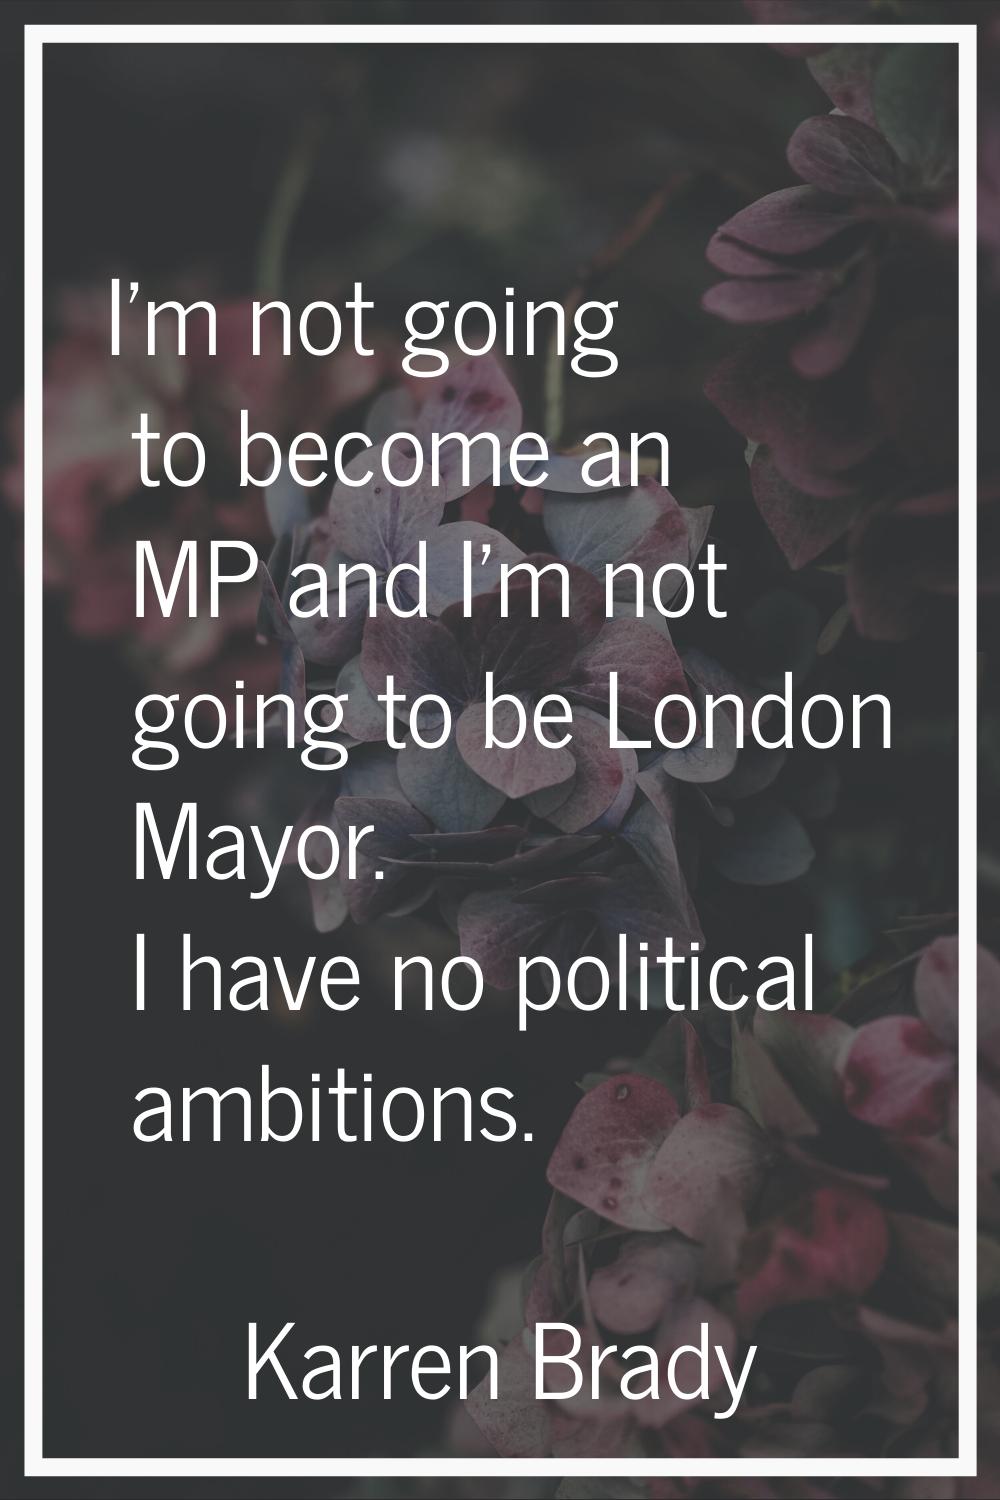 I'm not going to become an MP and I'm not going to be London Mayor. I have no political ambitions.